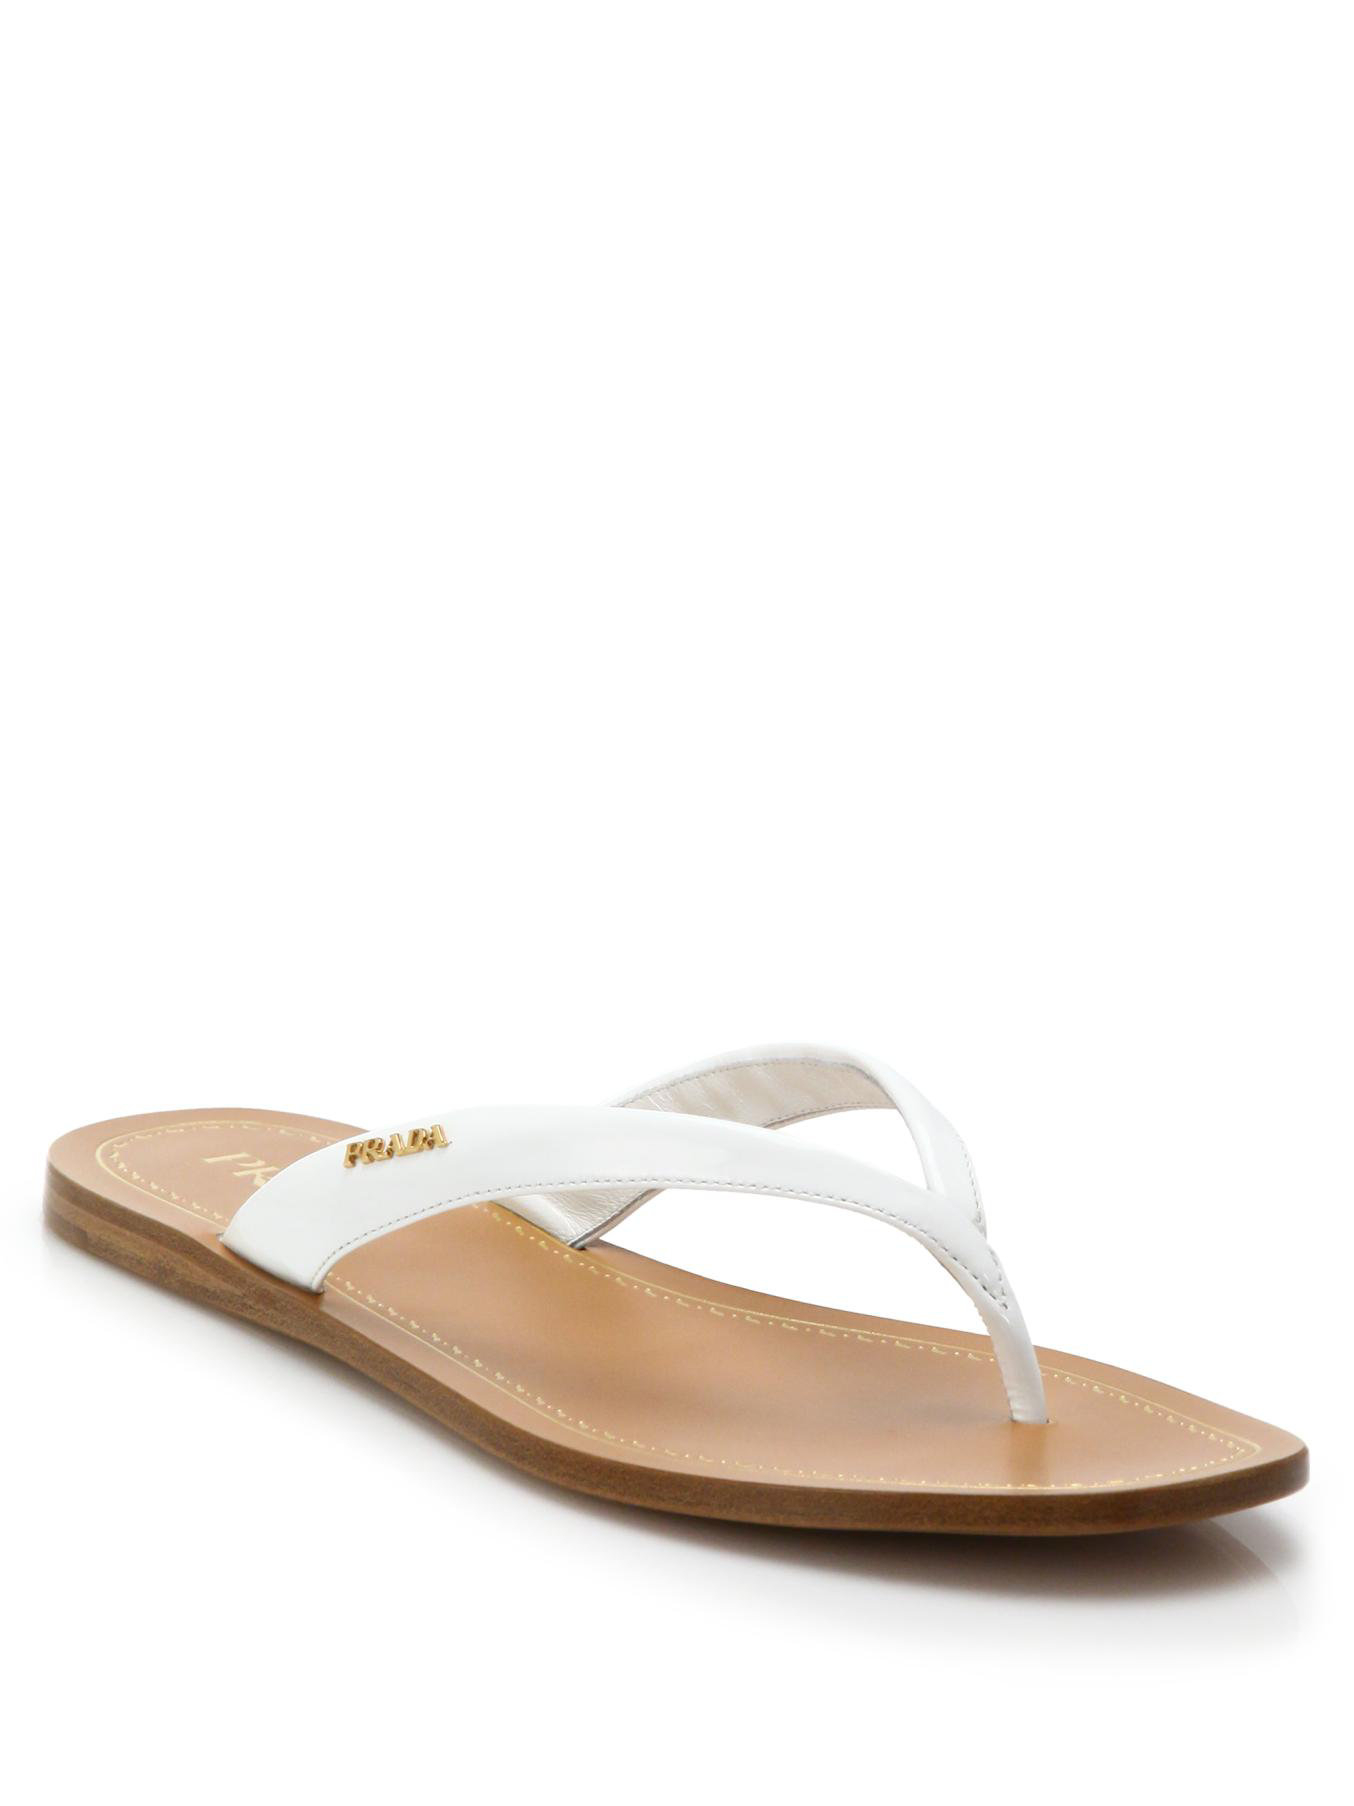 Prada Patent Leather Thong Sandals in White | Lyst